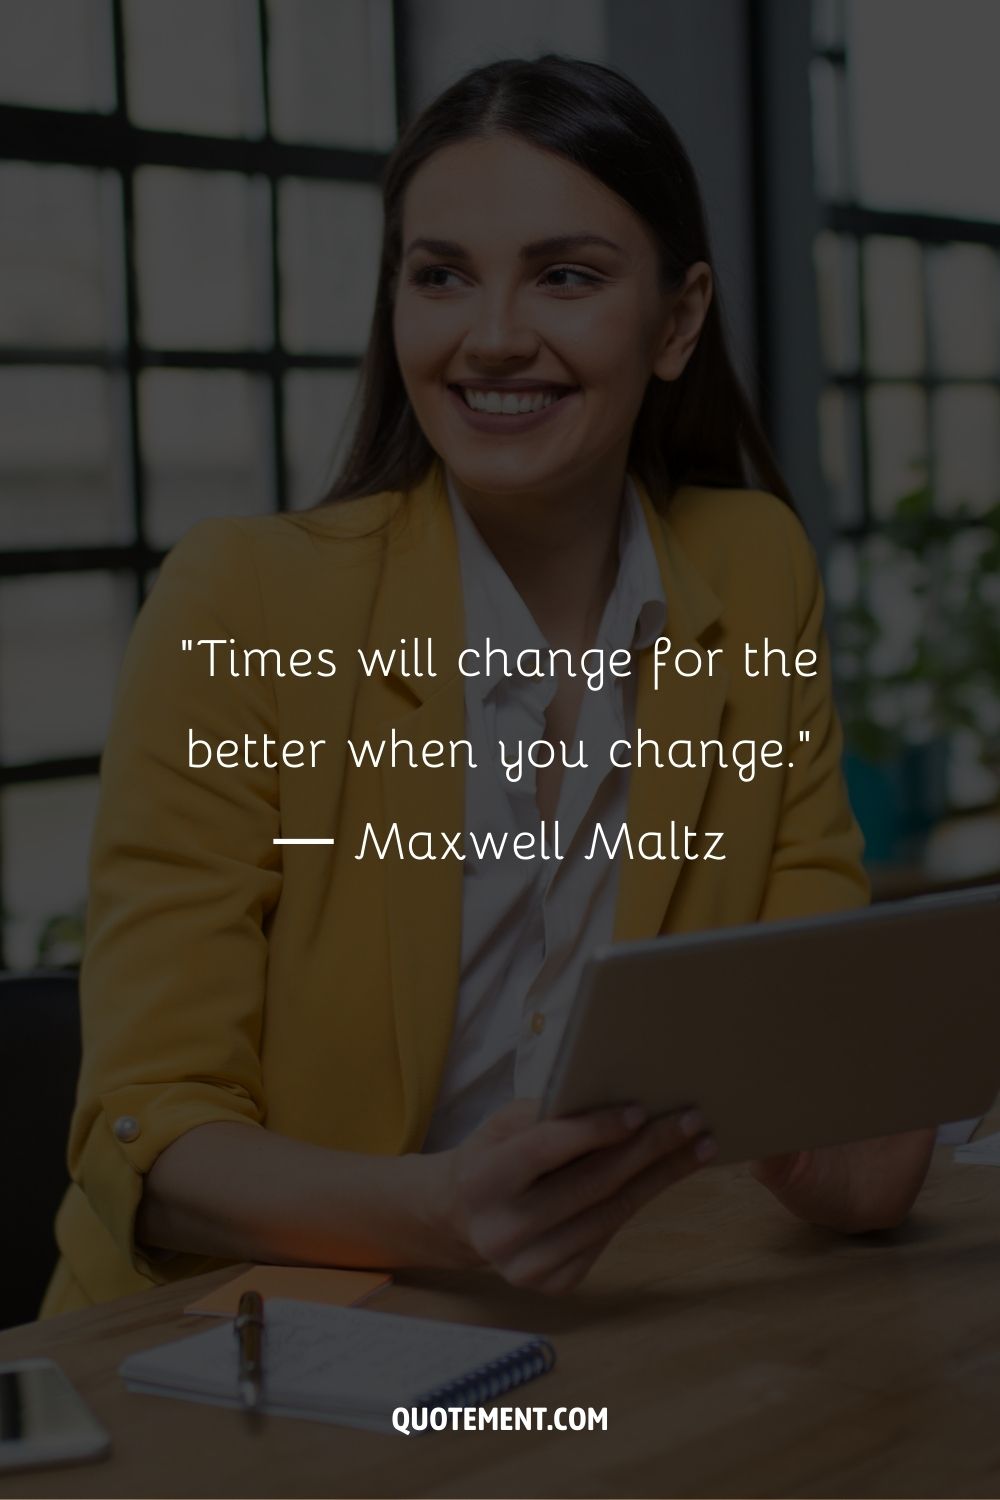 “Times will change for the better when you change.” ― Maxwell Maltz